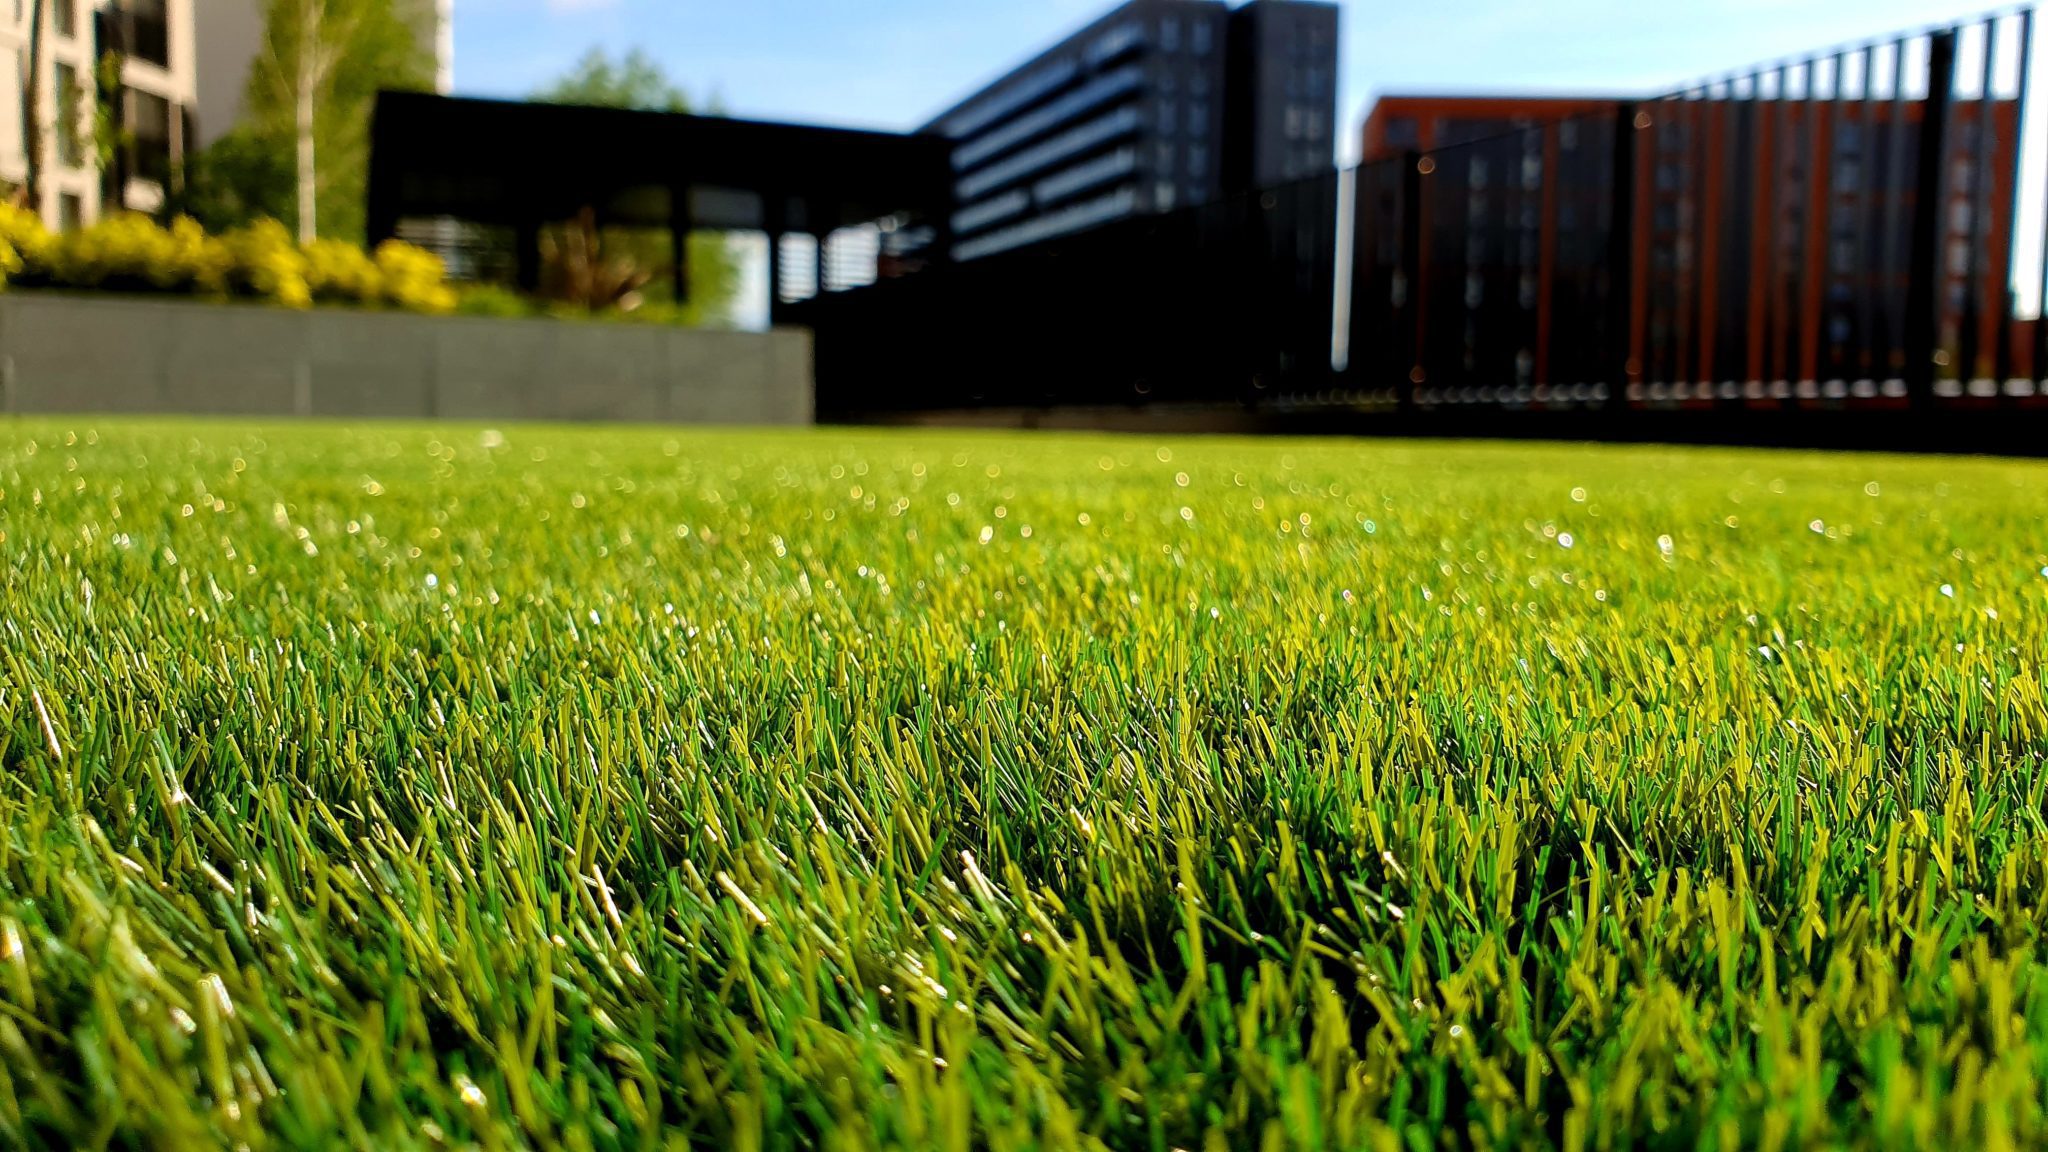 Go Touch Grass: The Healthy Aspect of Being Outside